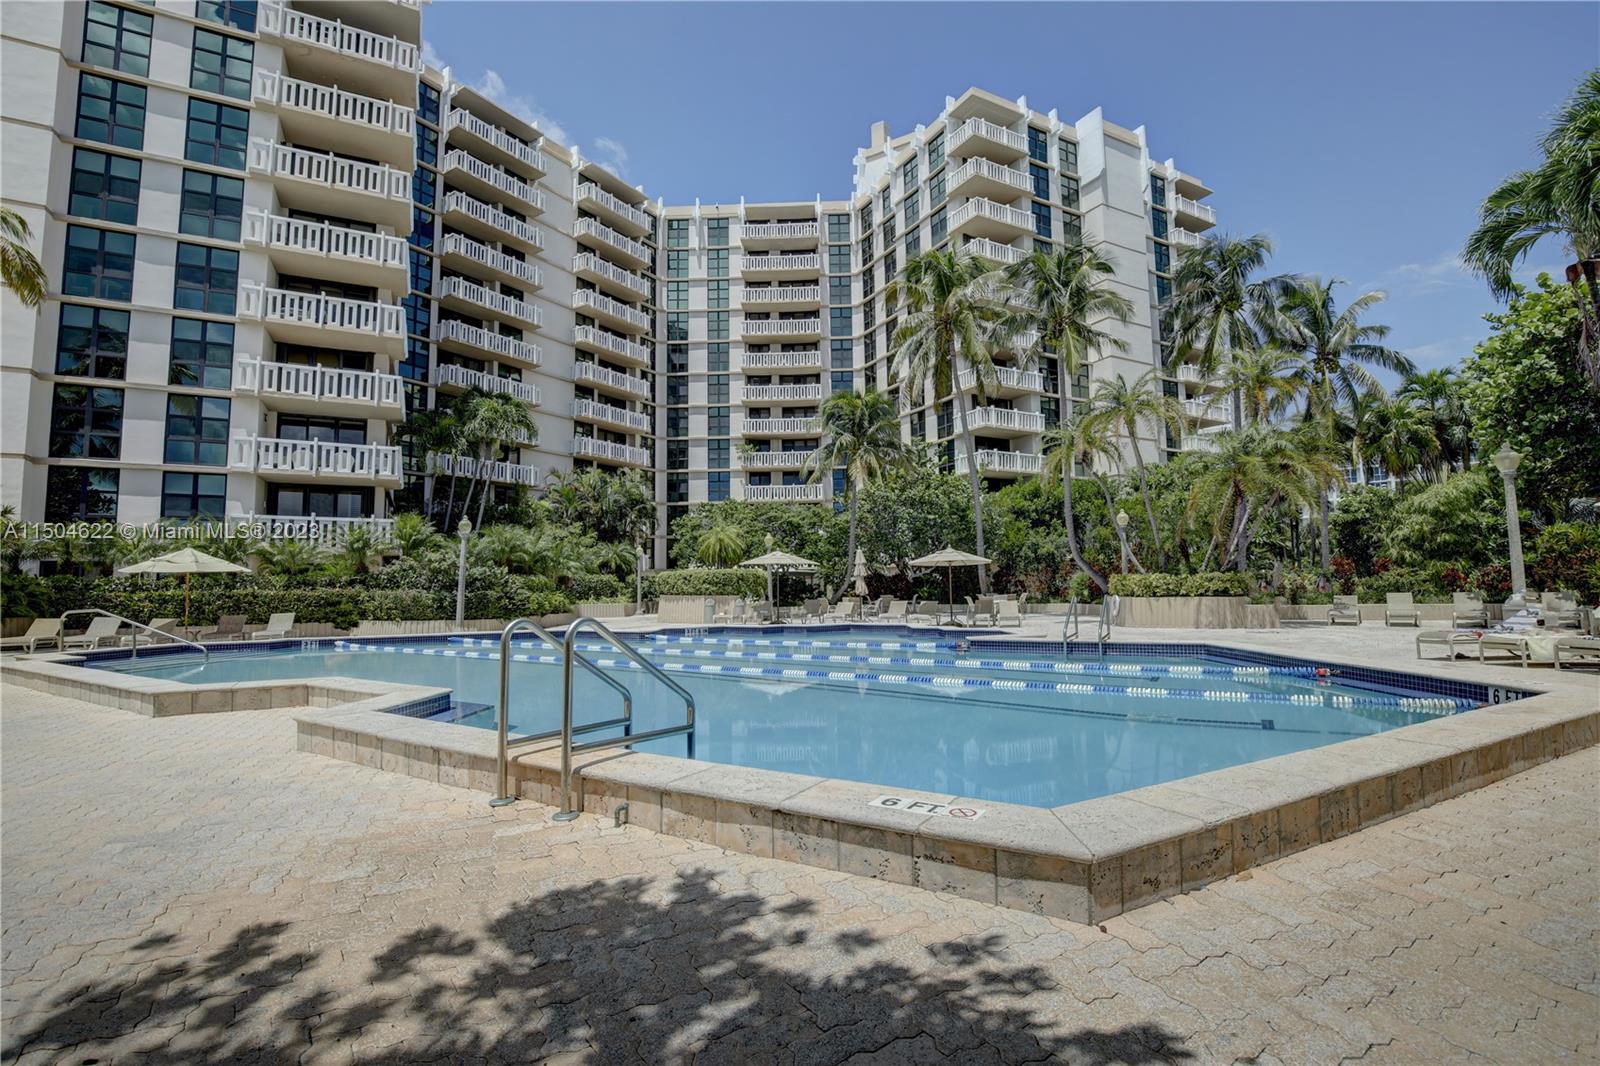 Beautiful and modern 2 bedroom and 2-bathroom apartment complete remodeled at The Towers of Key Biscayne. Enjoy a range of first-class amenities offered by The Towers, including full beach access with lounge chairs and umbrellas, two swimming pools, a barbecue area with ocean views, and the Toscana di mare Restaurant with pool and beach service. Have the benefit of play tennis in your own courts and exercise in the two top-of-the-line gyms equipped with sauna and steam rooms. Additional facilities include a card room, media room, two on-site work offices and much more. Don't miss out on the opportunity to live in one of the best neighborhoods in America.